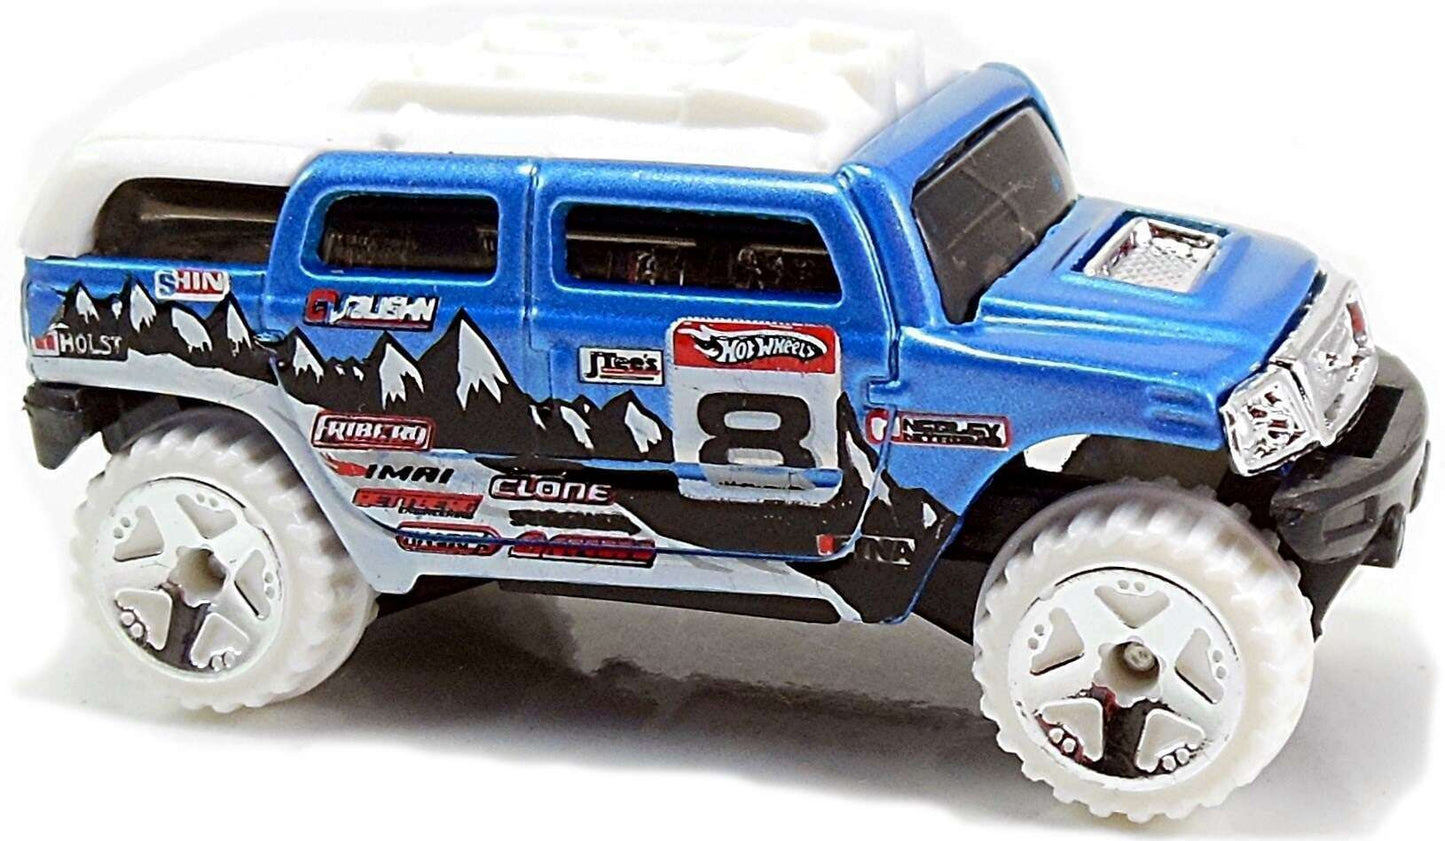 Hot Wheels 2011 - Collector # 194/244 - Thrill Racers / Ice 2/6 - Rockster (HumVee) - Blue / # 8 - USA Card